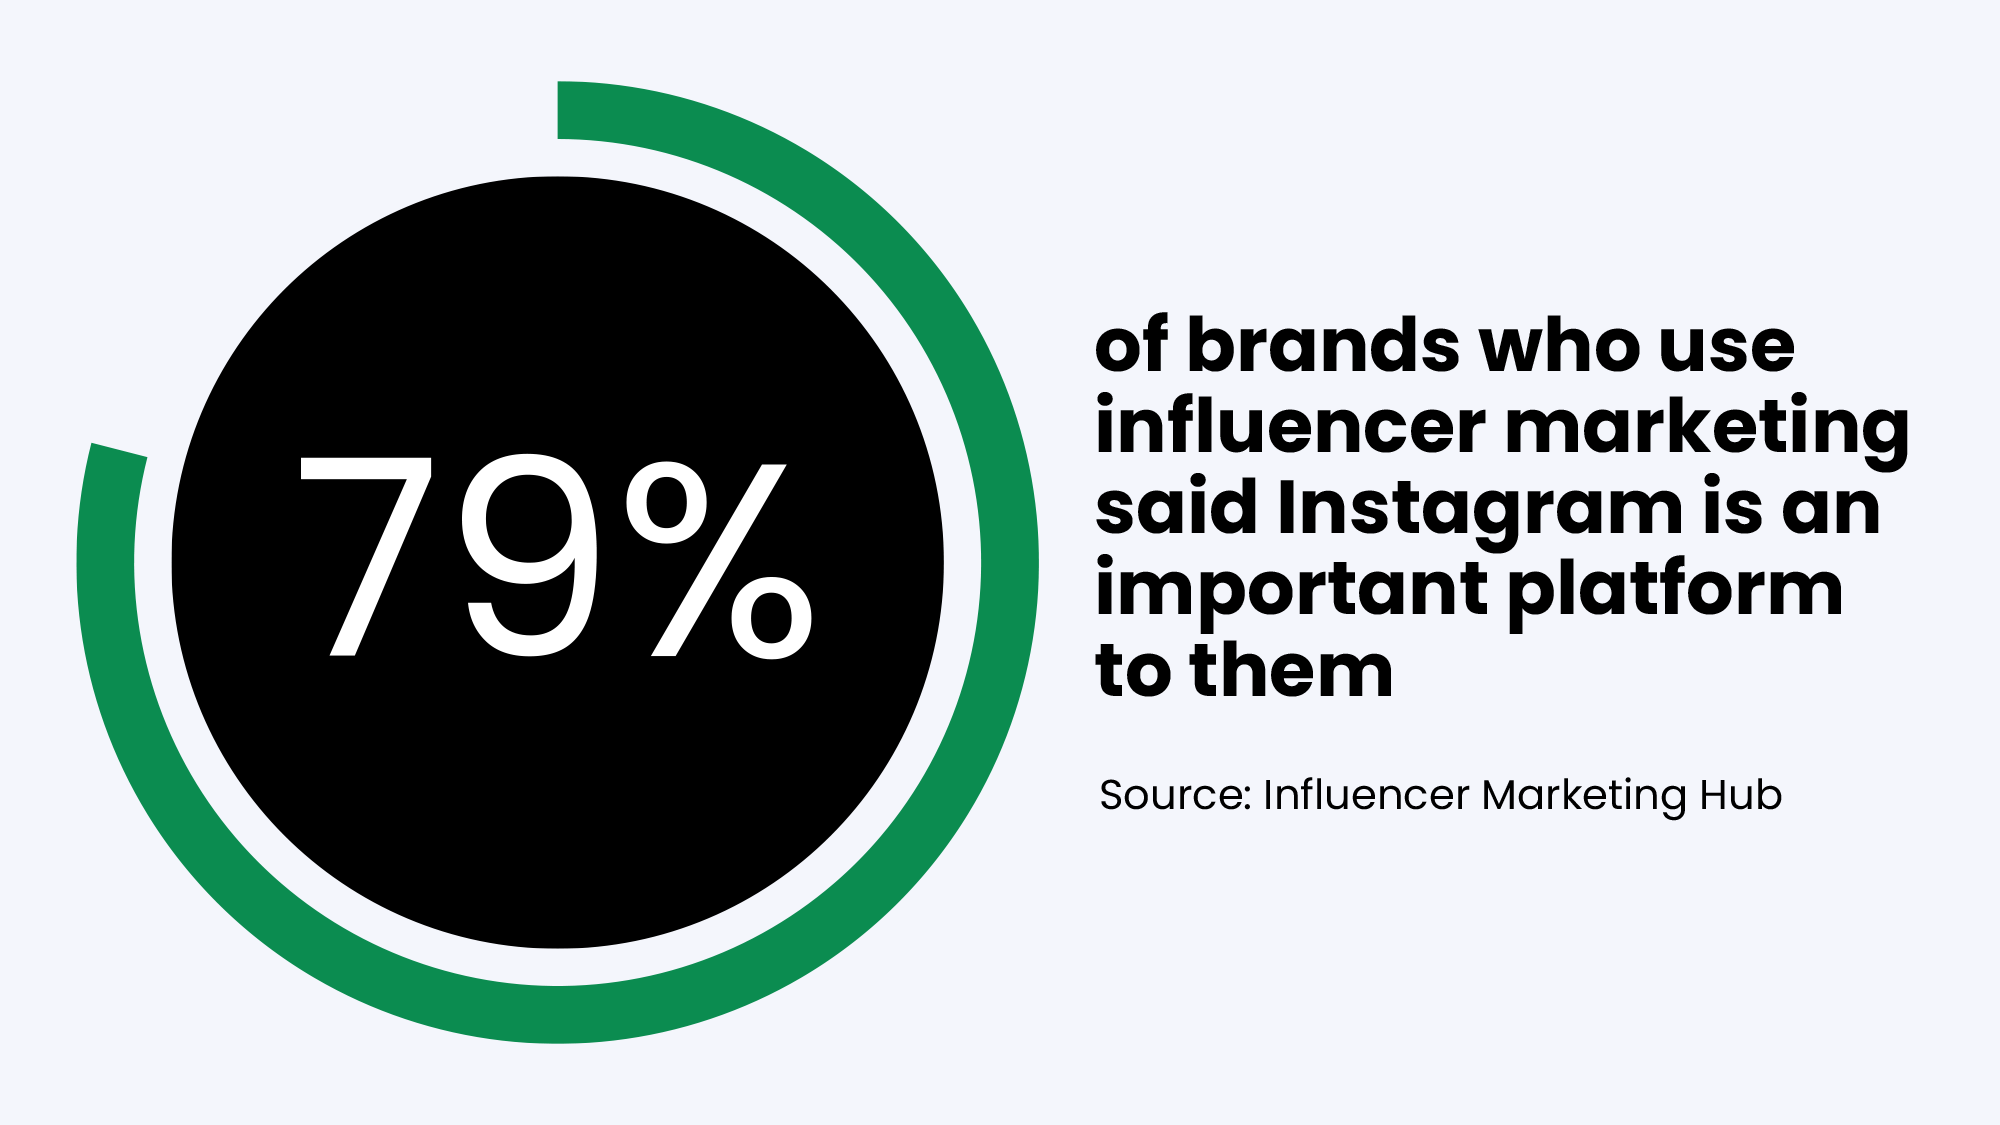 79% of brands who use influencer marketing said Instagram is an important platform to them